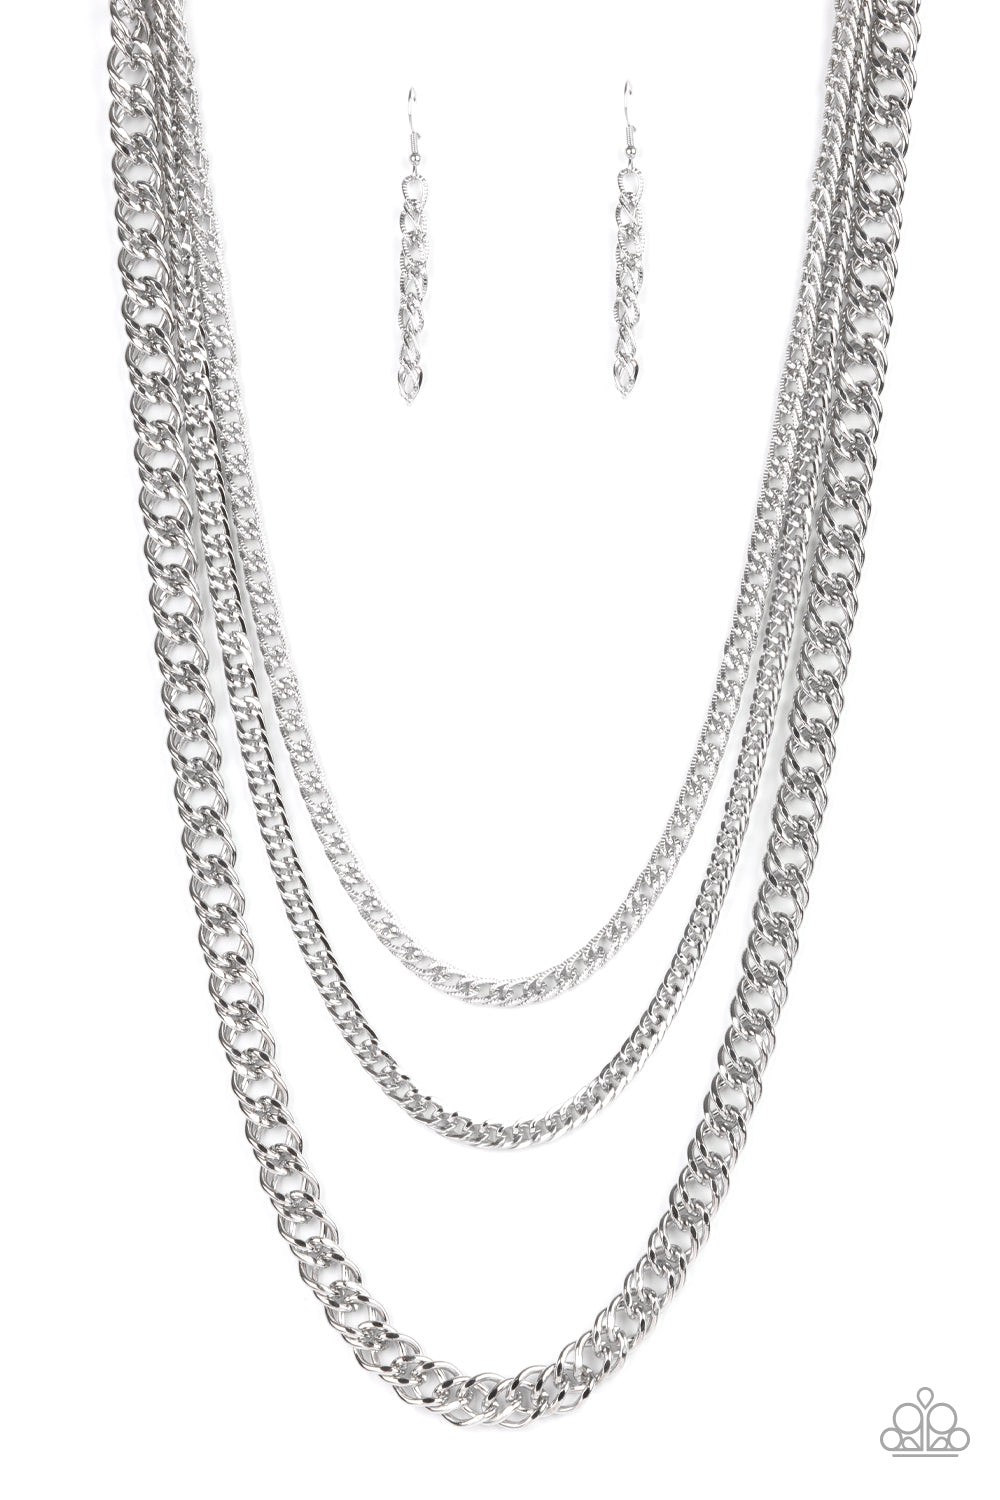 Paparazzi Accessories Chain Of Champions - Sliver Necklaces & Earrings